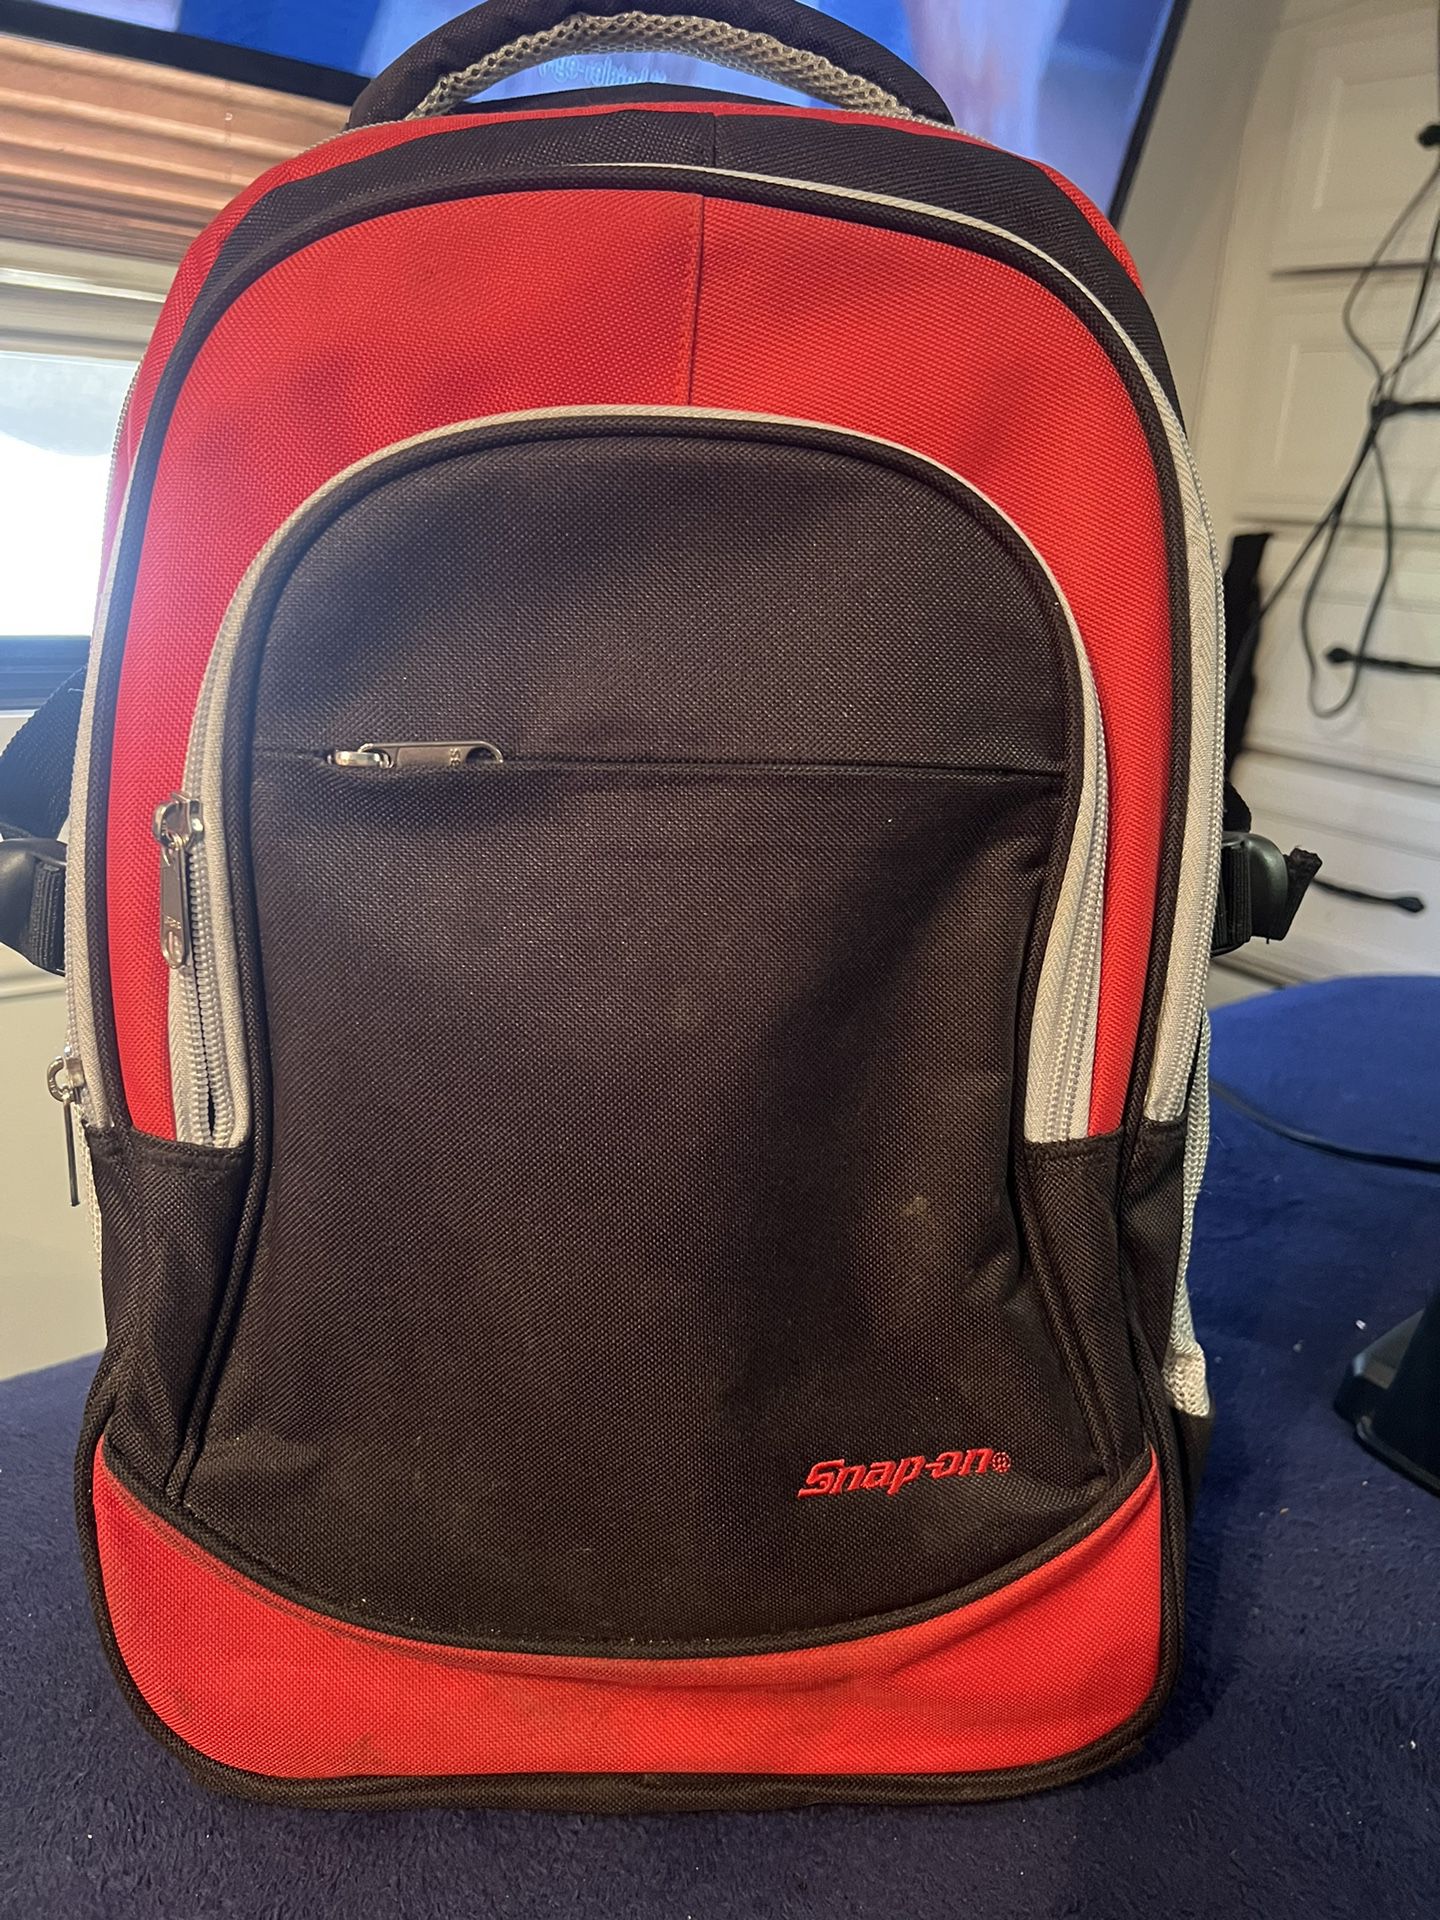 Snap On Backpack Excellent Condition